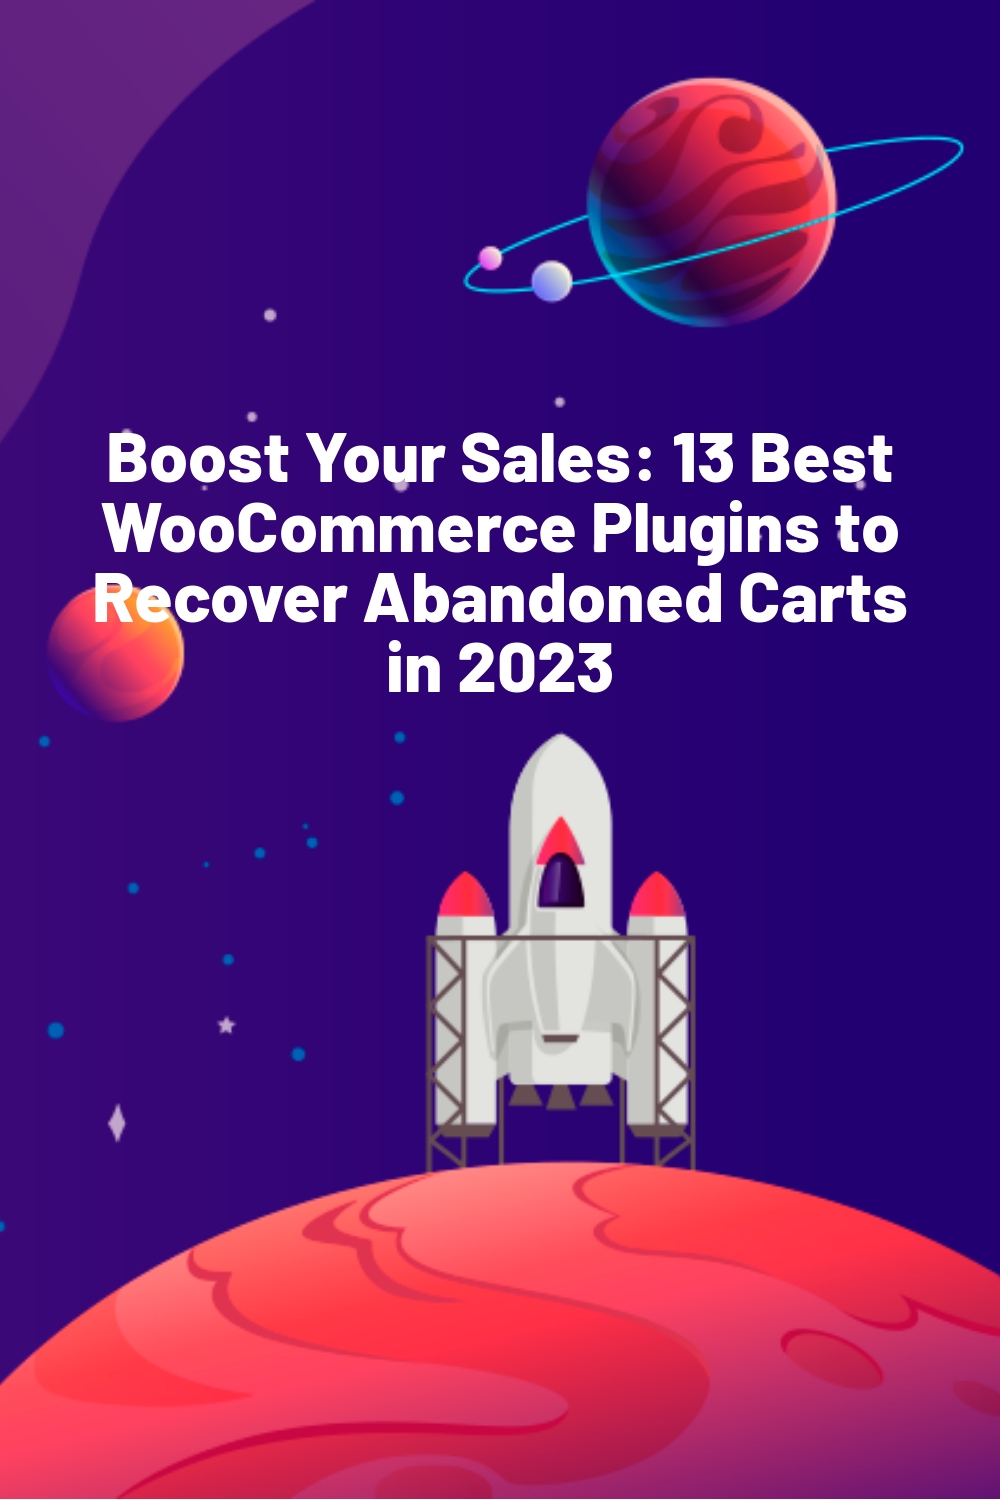 Boost Your Sales: 13 Best WooCommerce Plugins to Recover Abandoned Carts in 2023